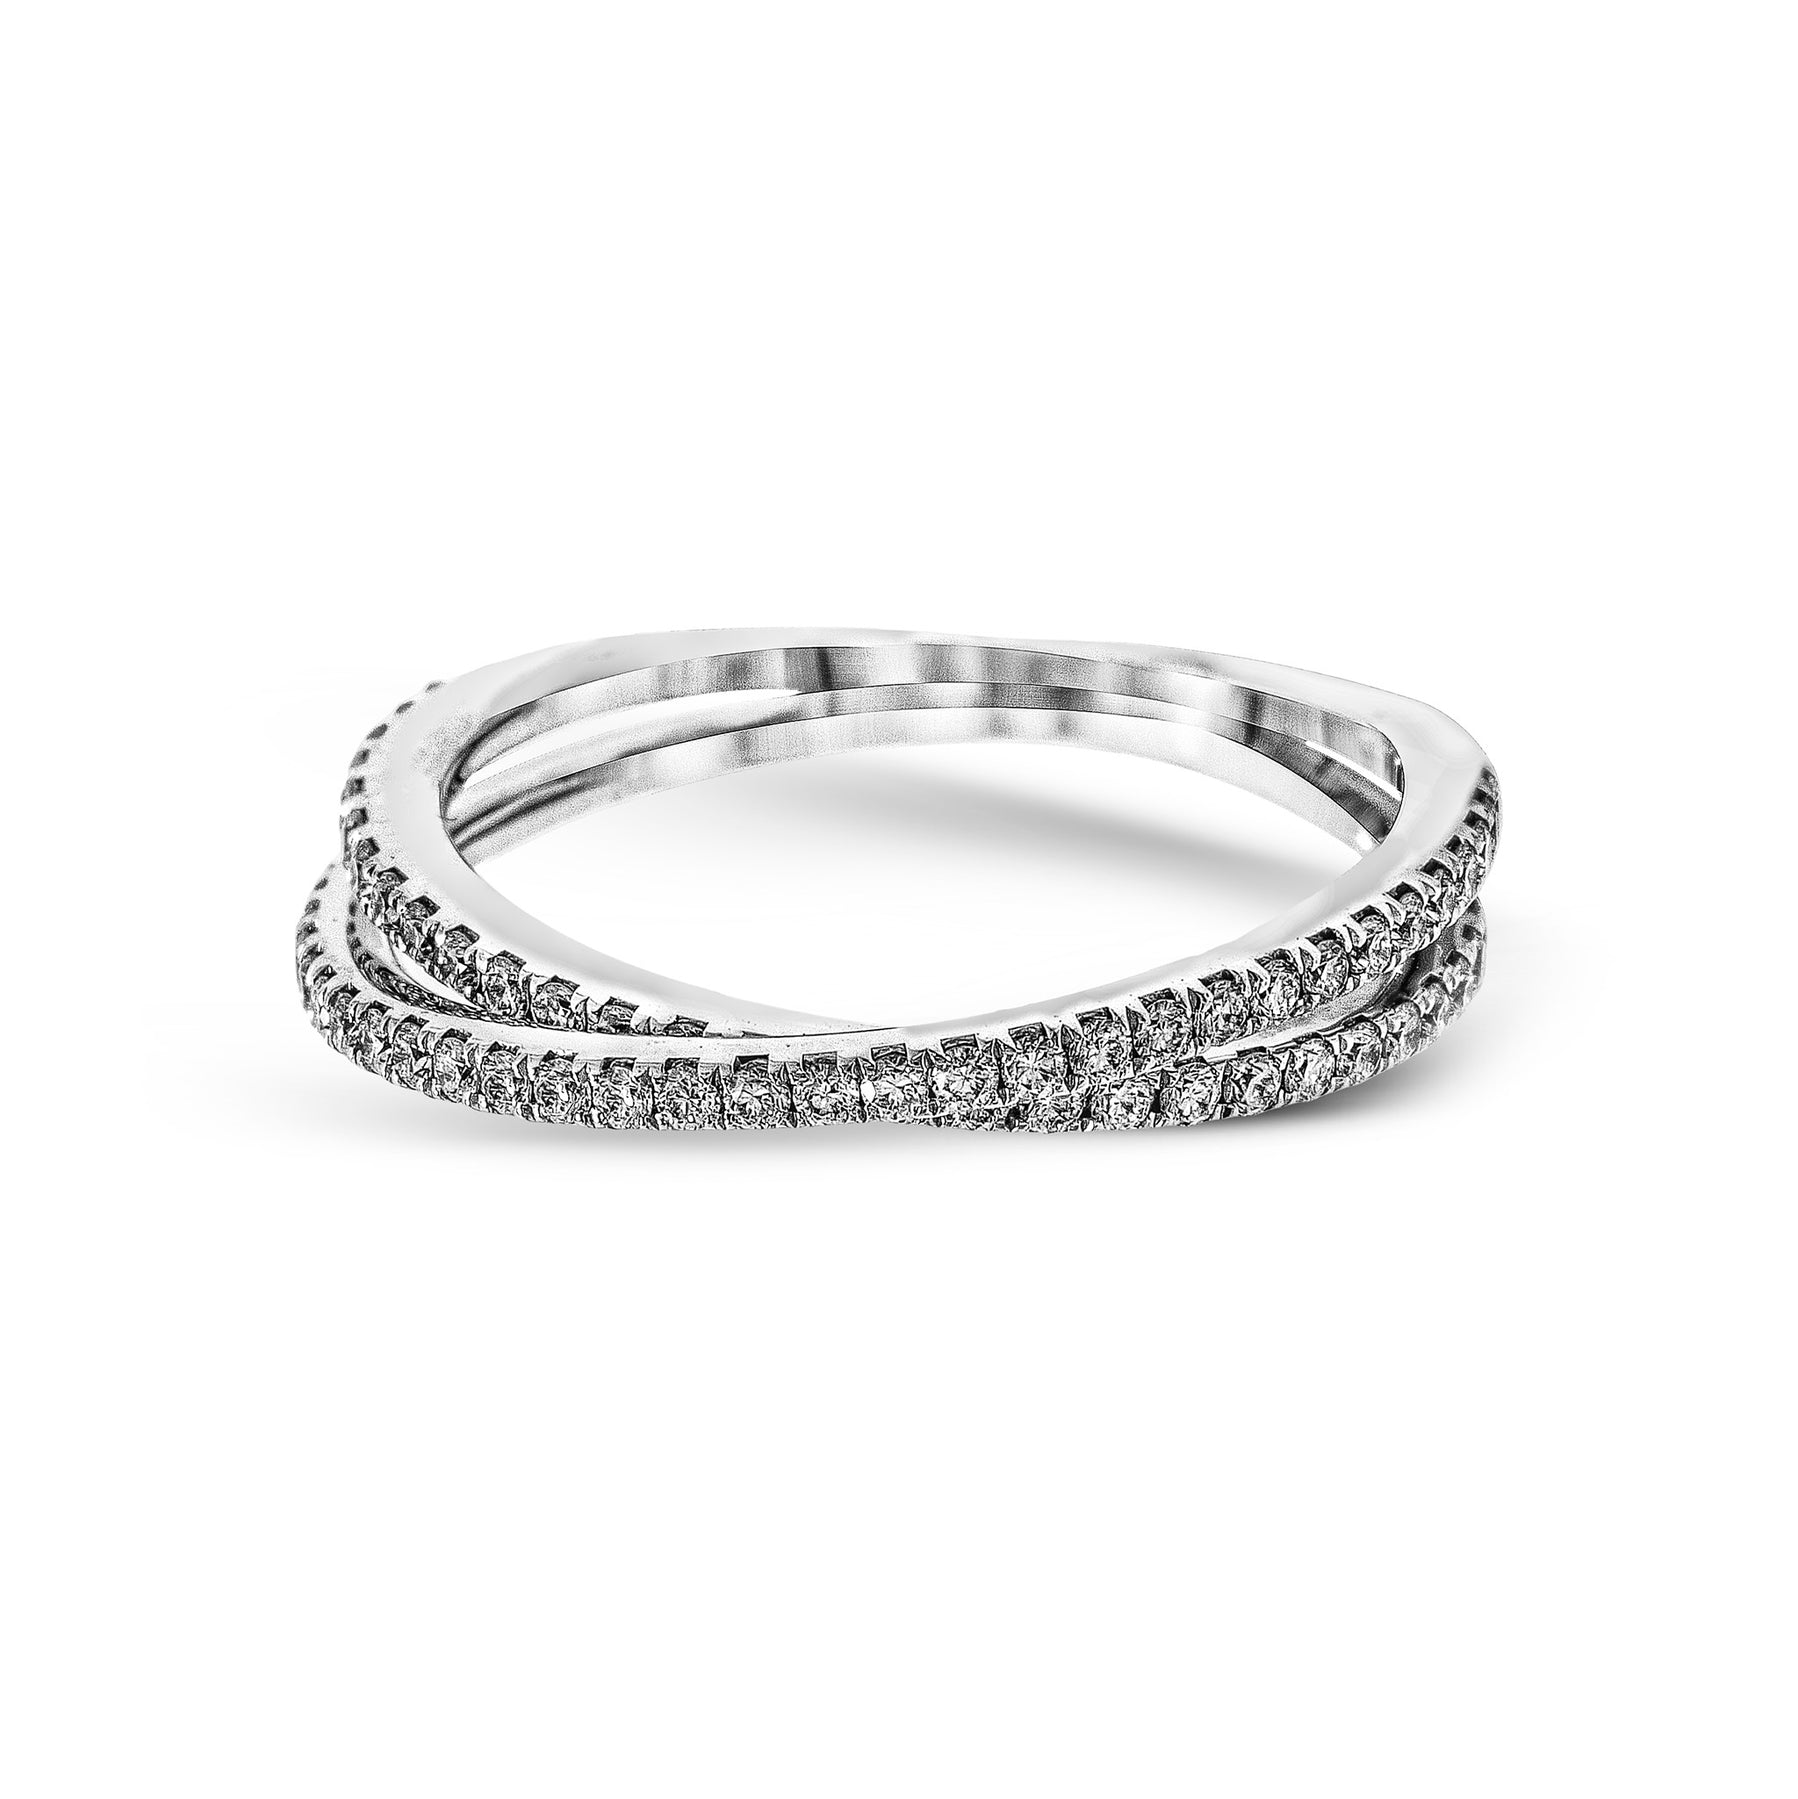 Criss-cross Wedding Band in 18k Gold with Diamonds MR1577-A-B